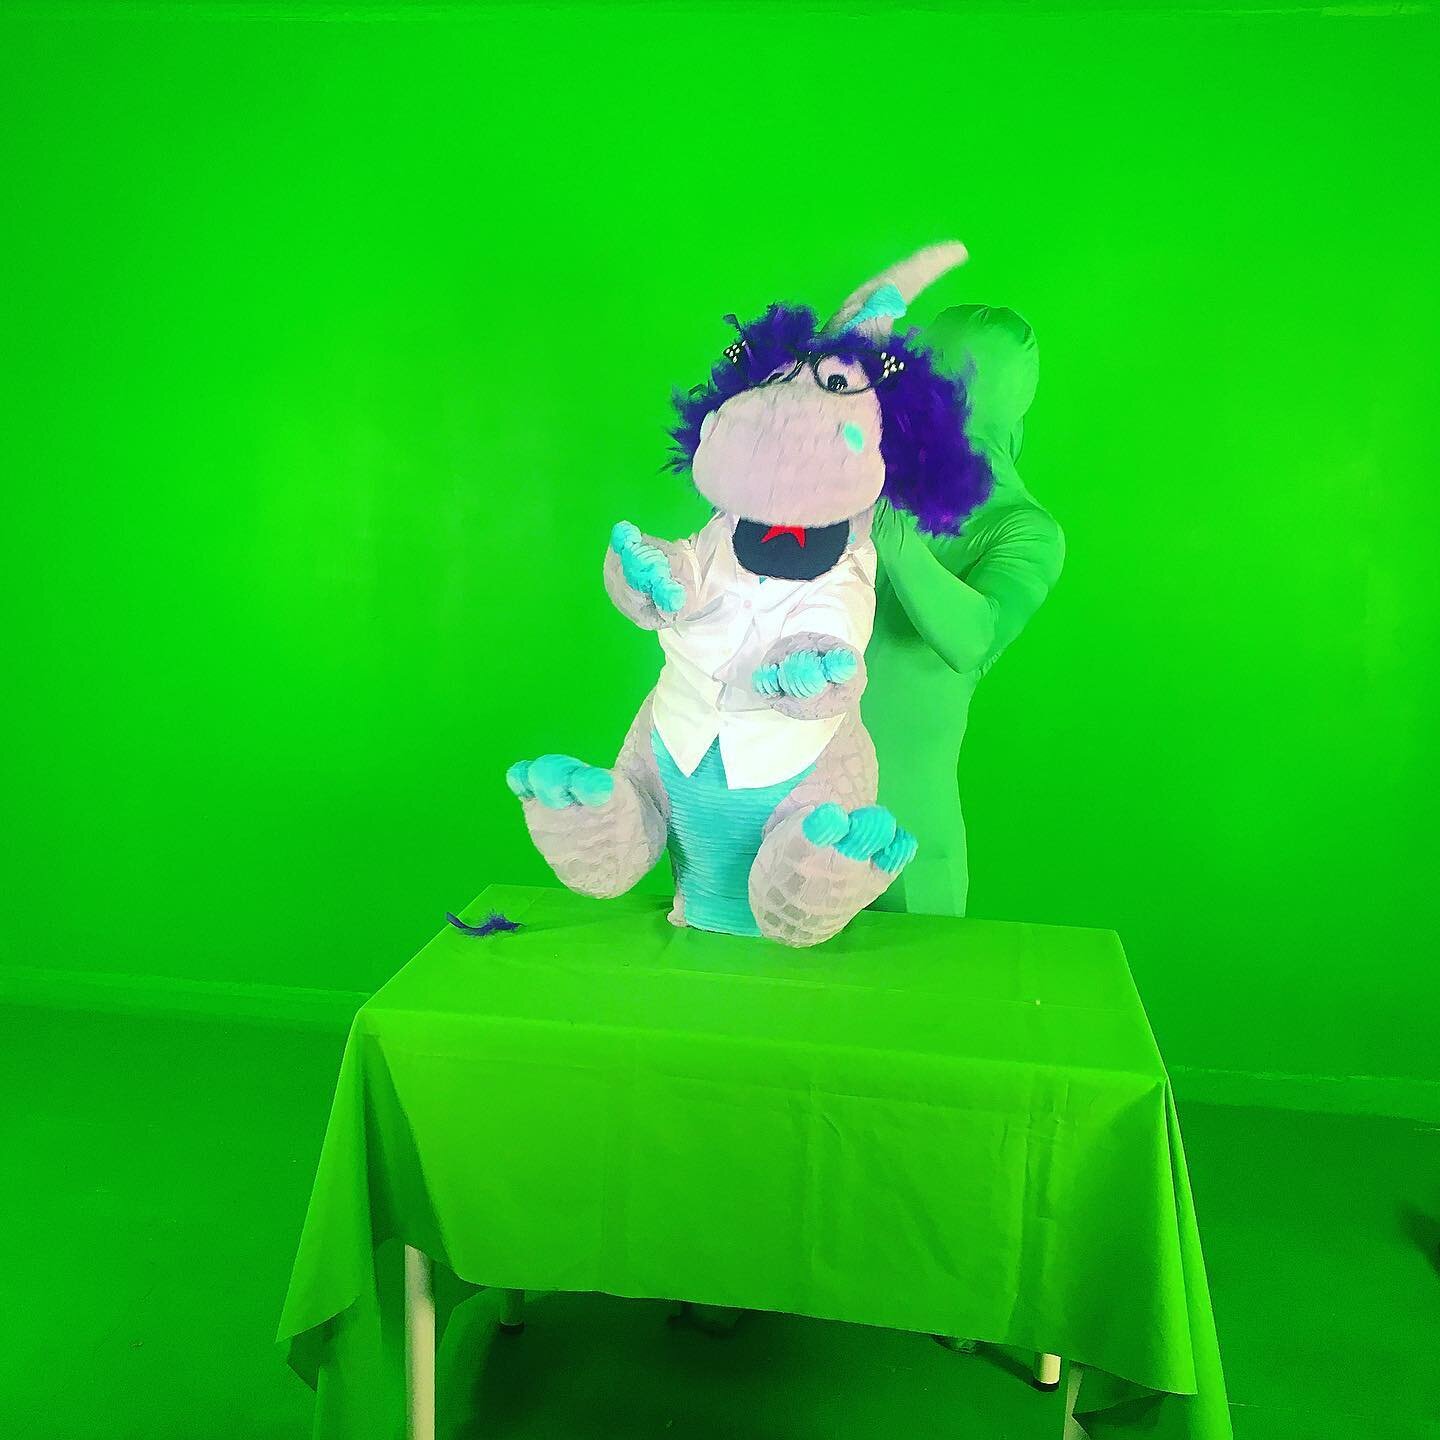 Filming the season premiere of The Marky Monday Show Season 4 which begins in February! Yay!! #markymonday #greenscreen #puppet #dinosaur